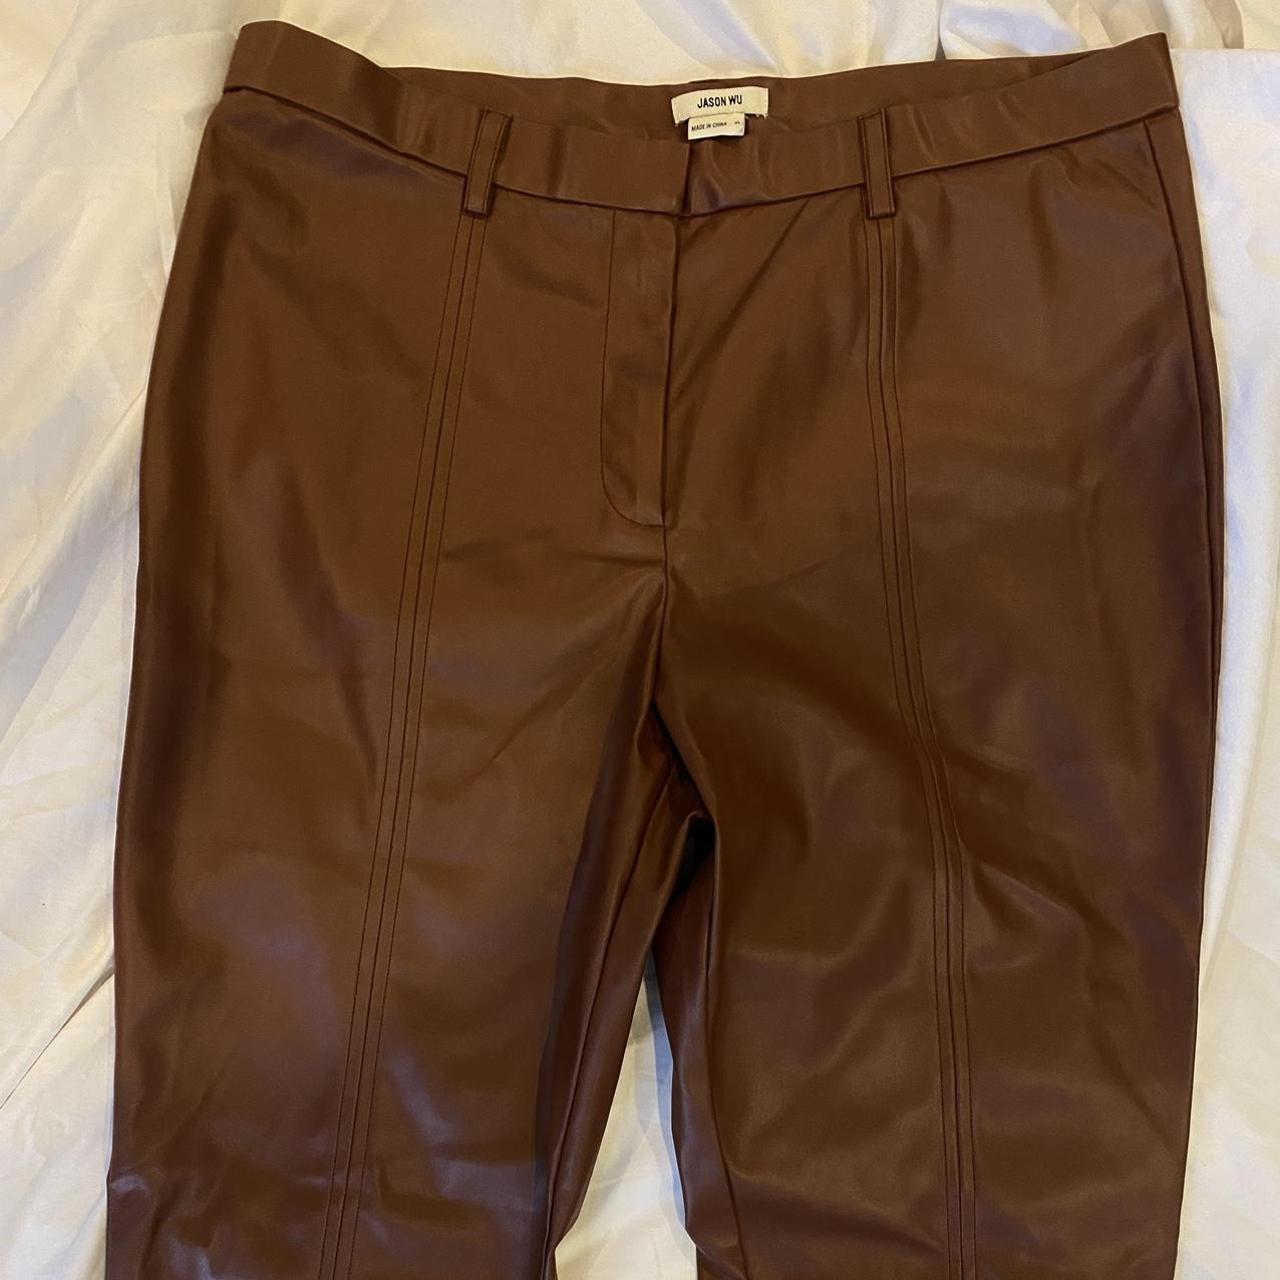 Brown faux leather pants with slits at the bottom of - Depop